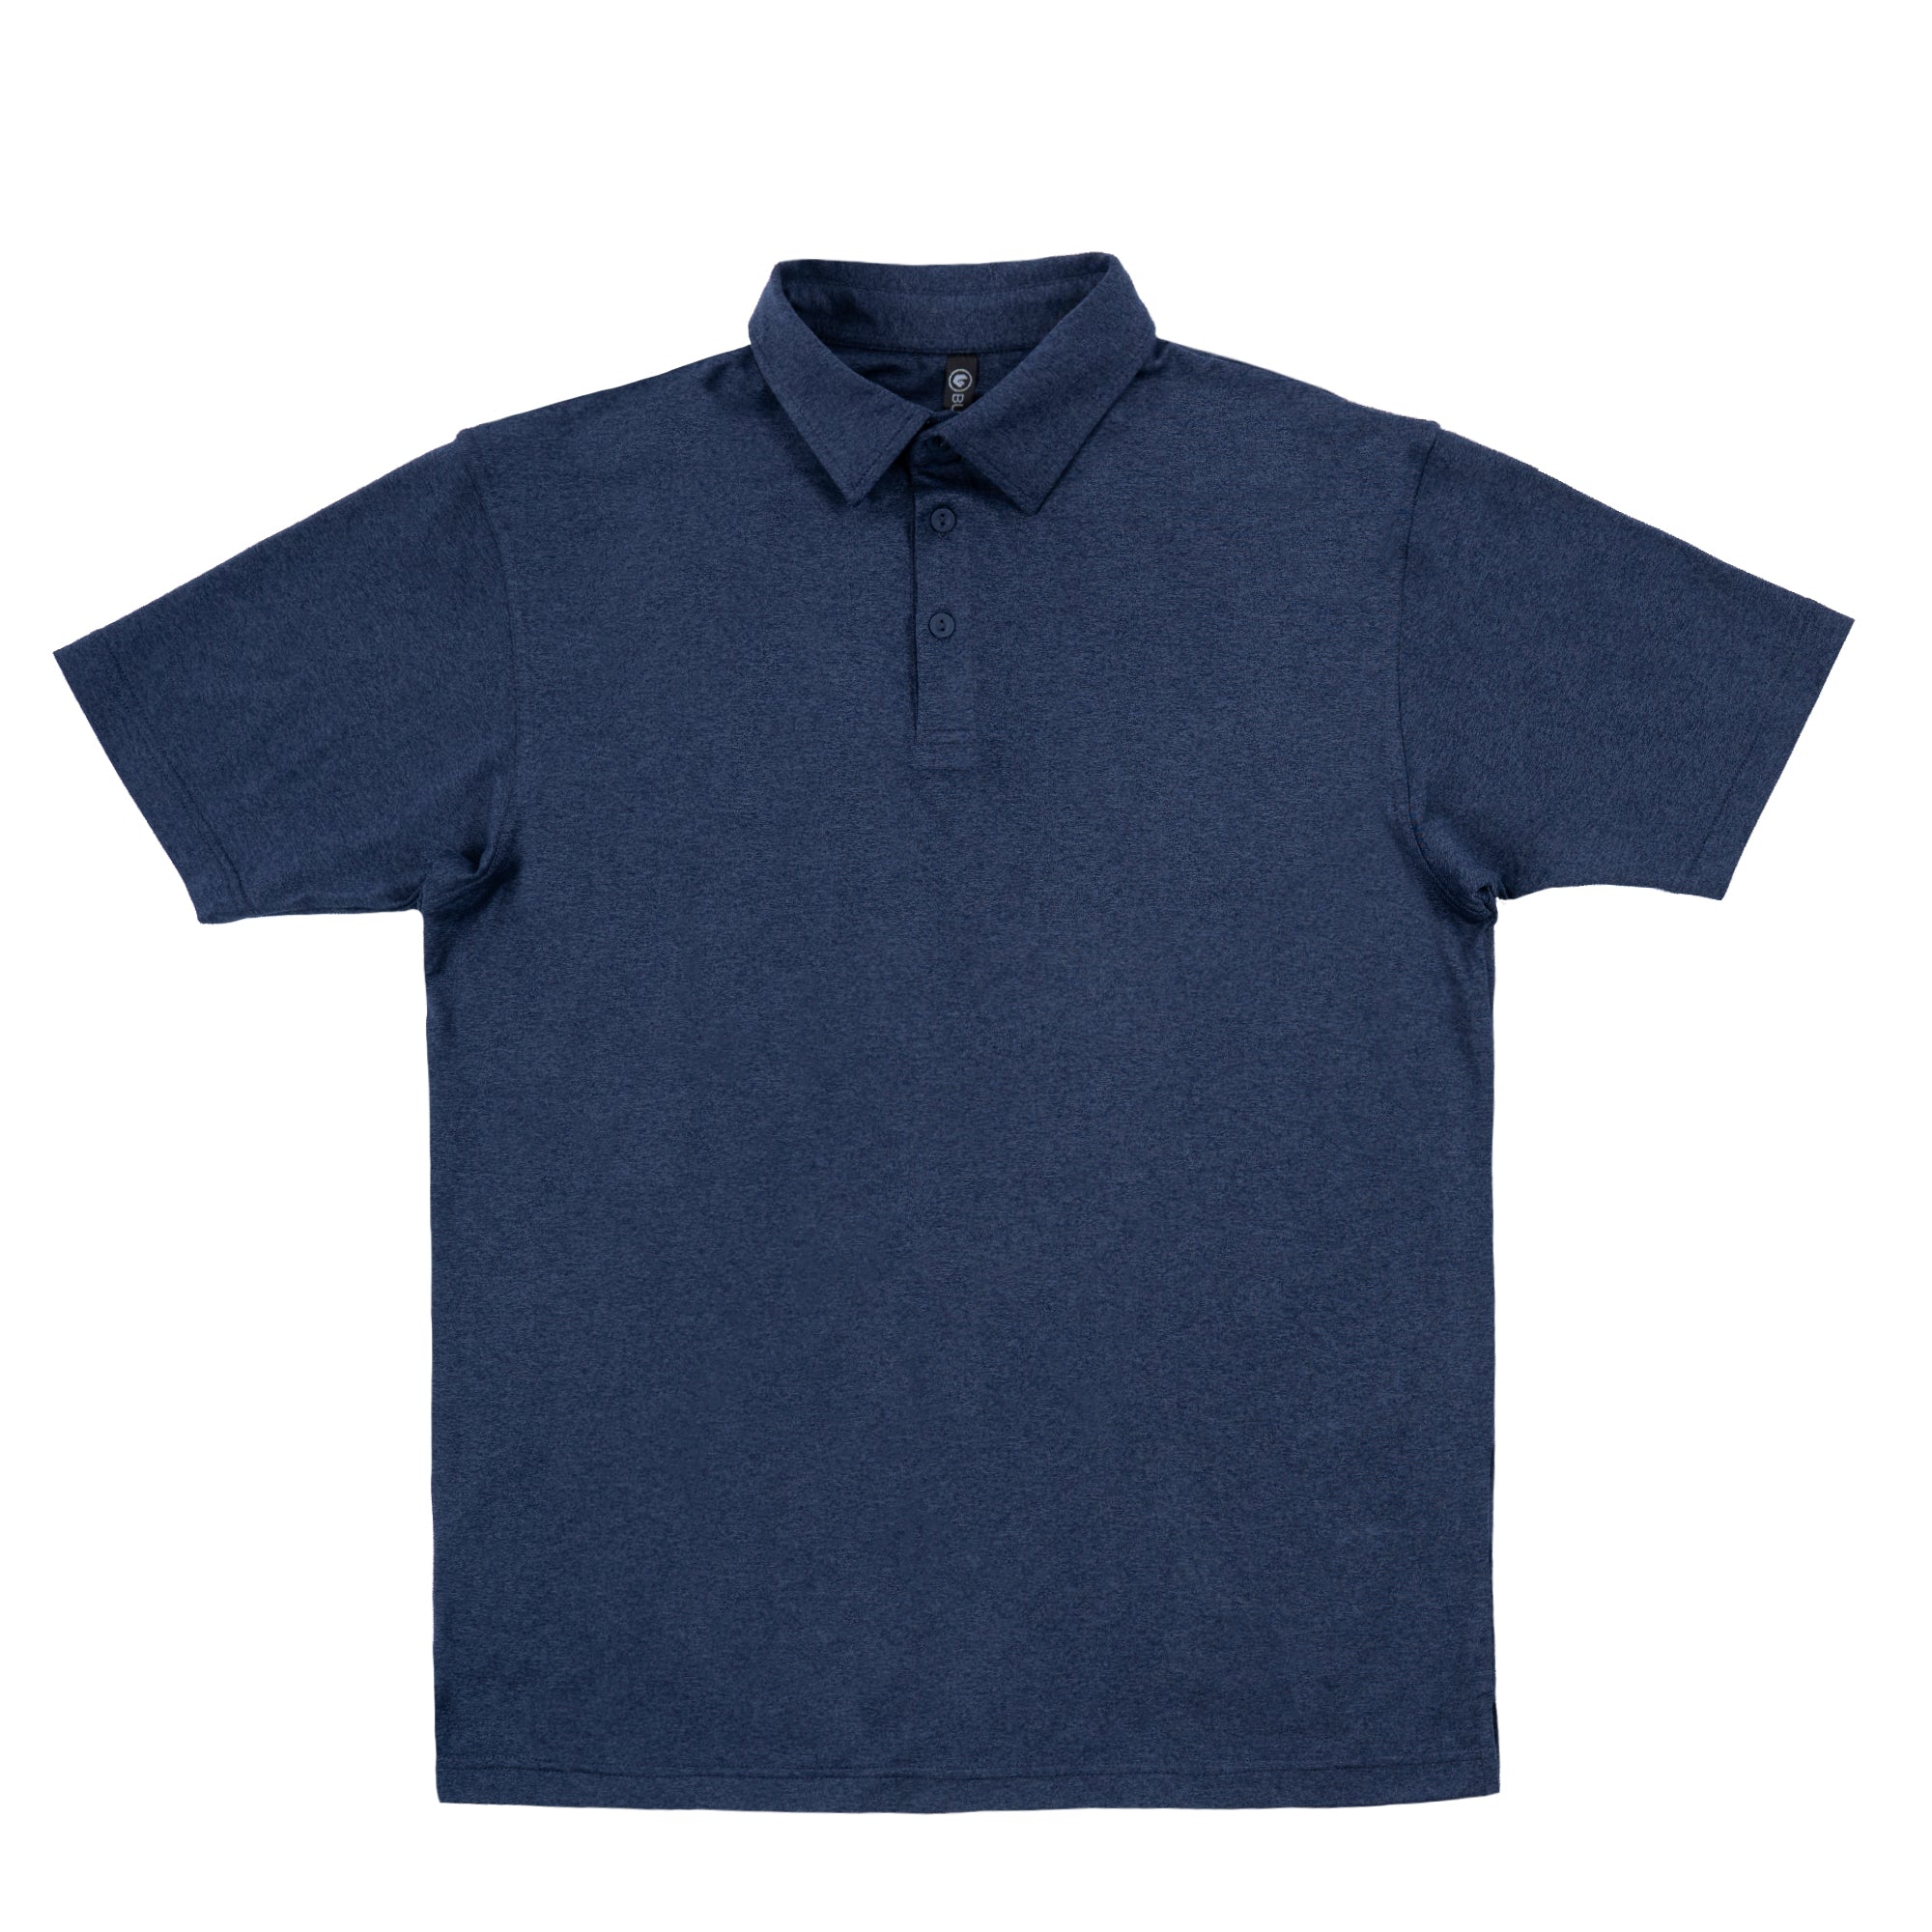 Buy heather-ink-blue MENS DAWN TO DUSK POLO